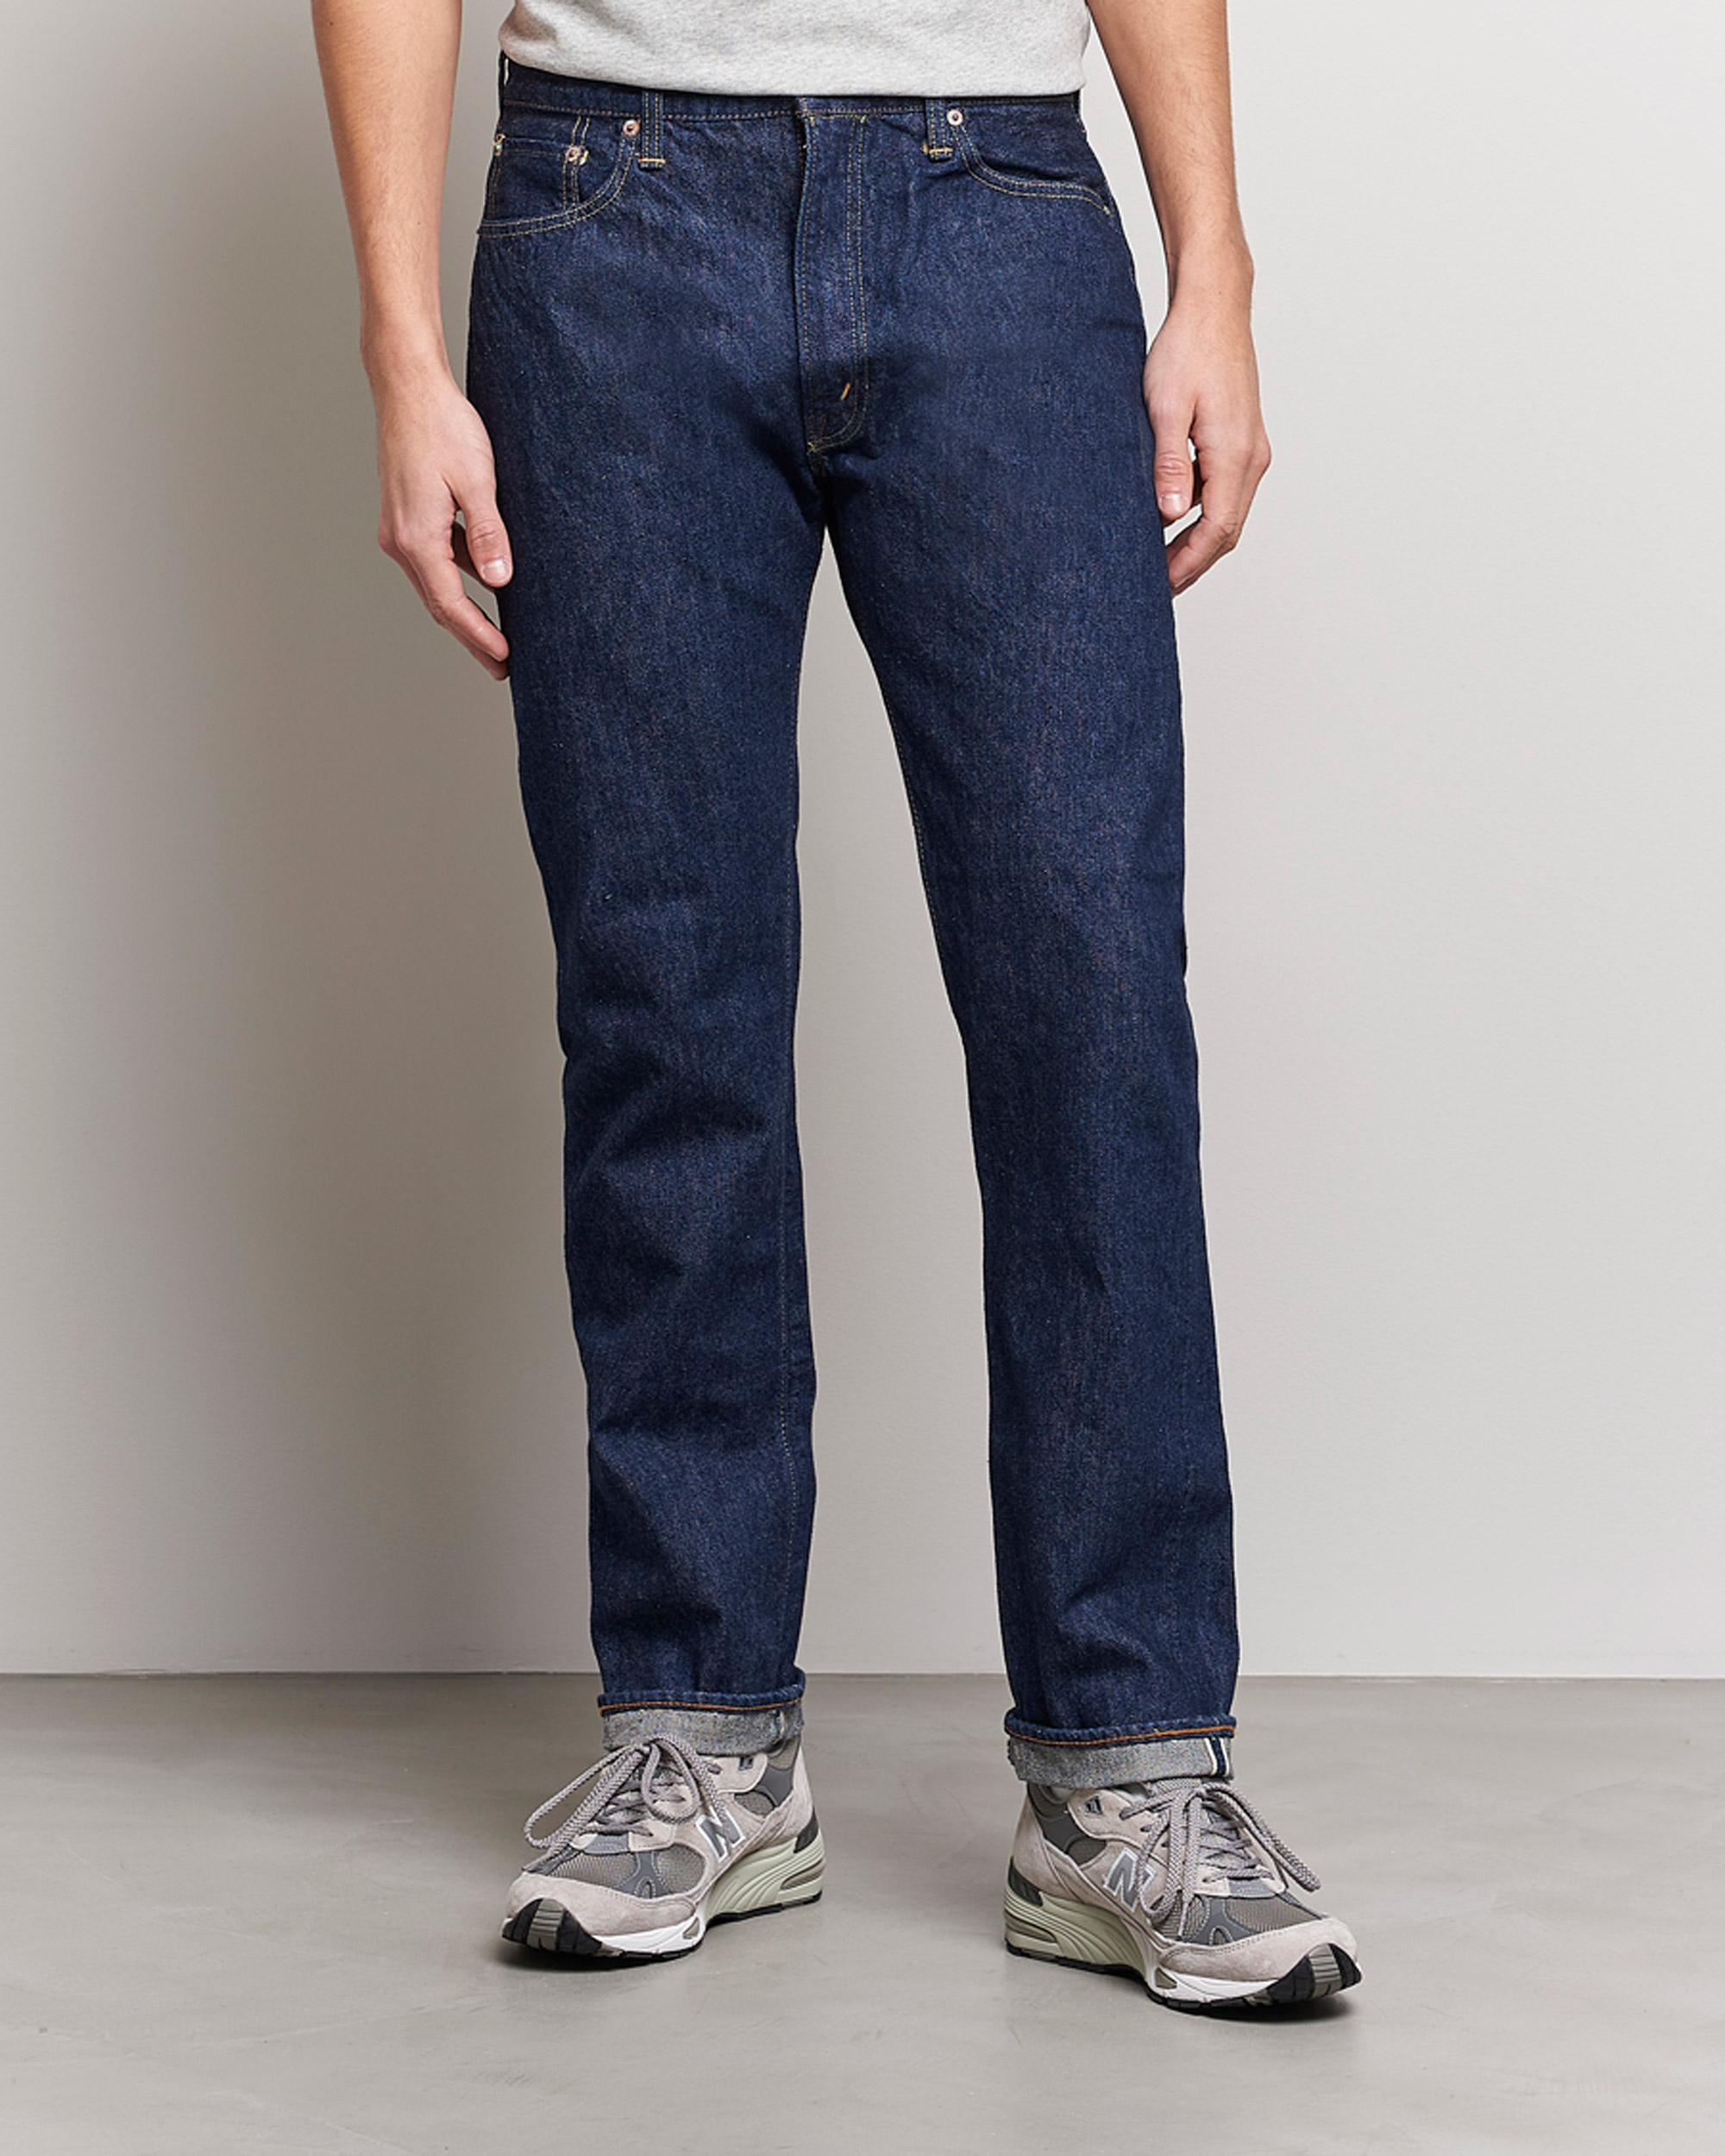 Men | Jeans | orSlow | Tapered Fit 107 Selvedge Jeans One Wash